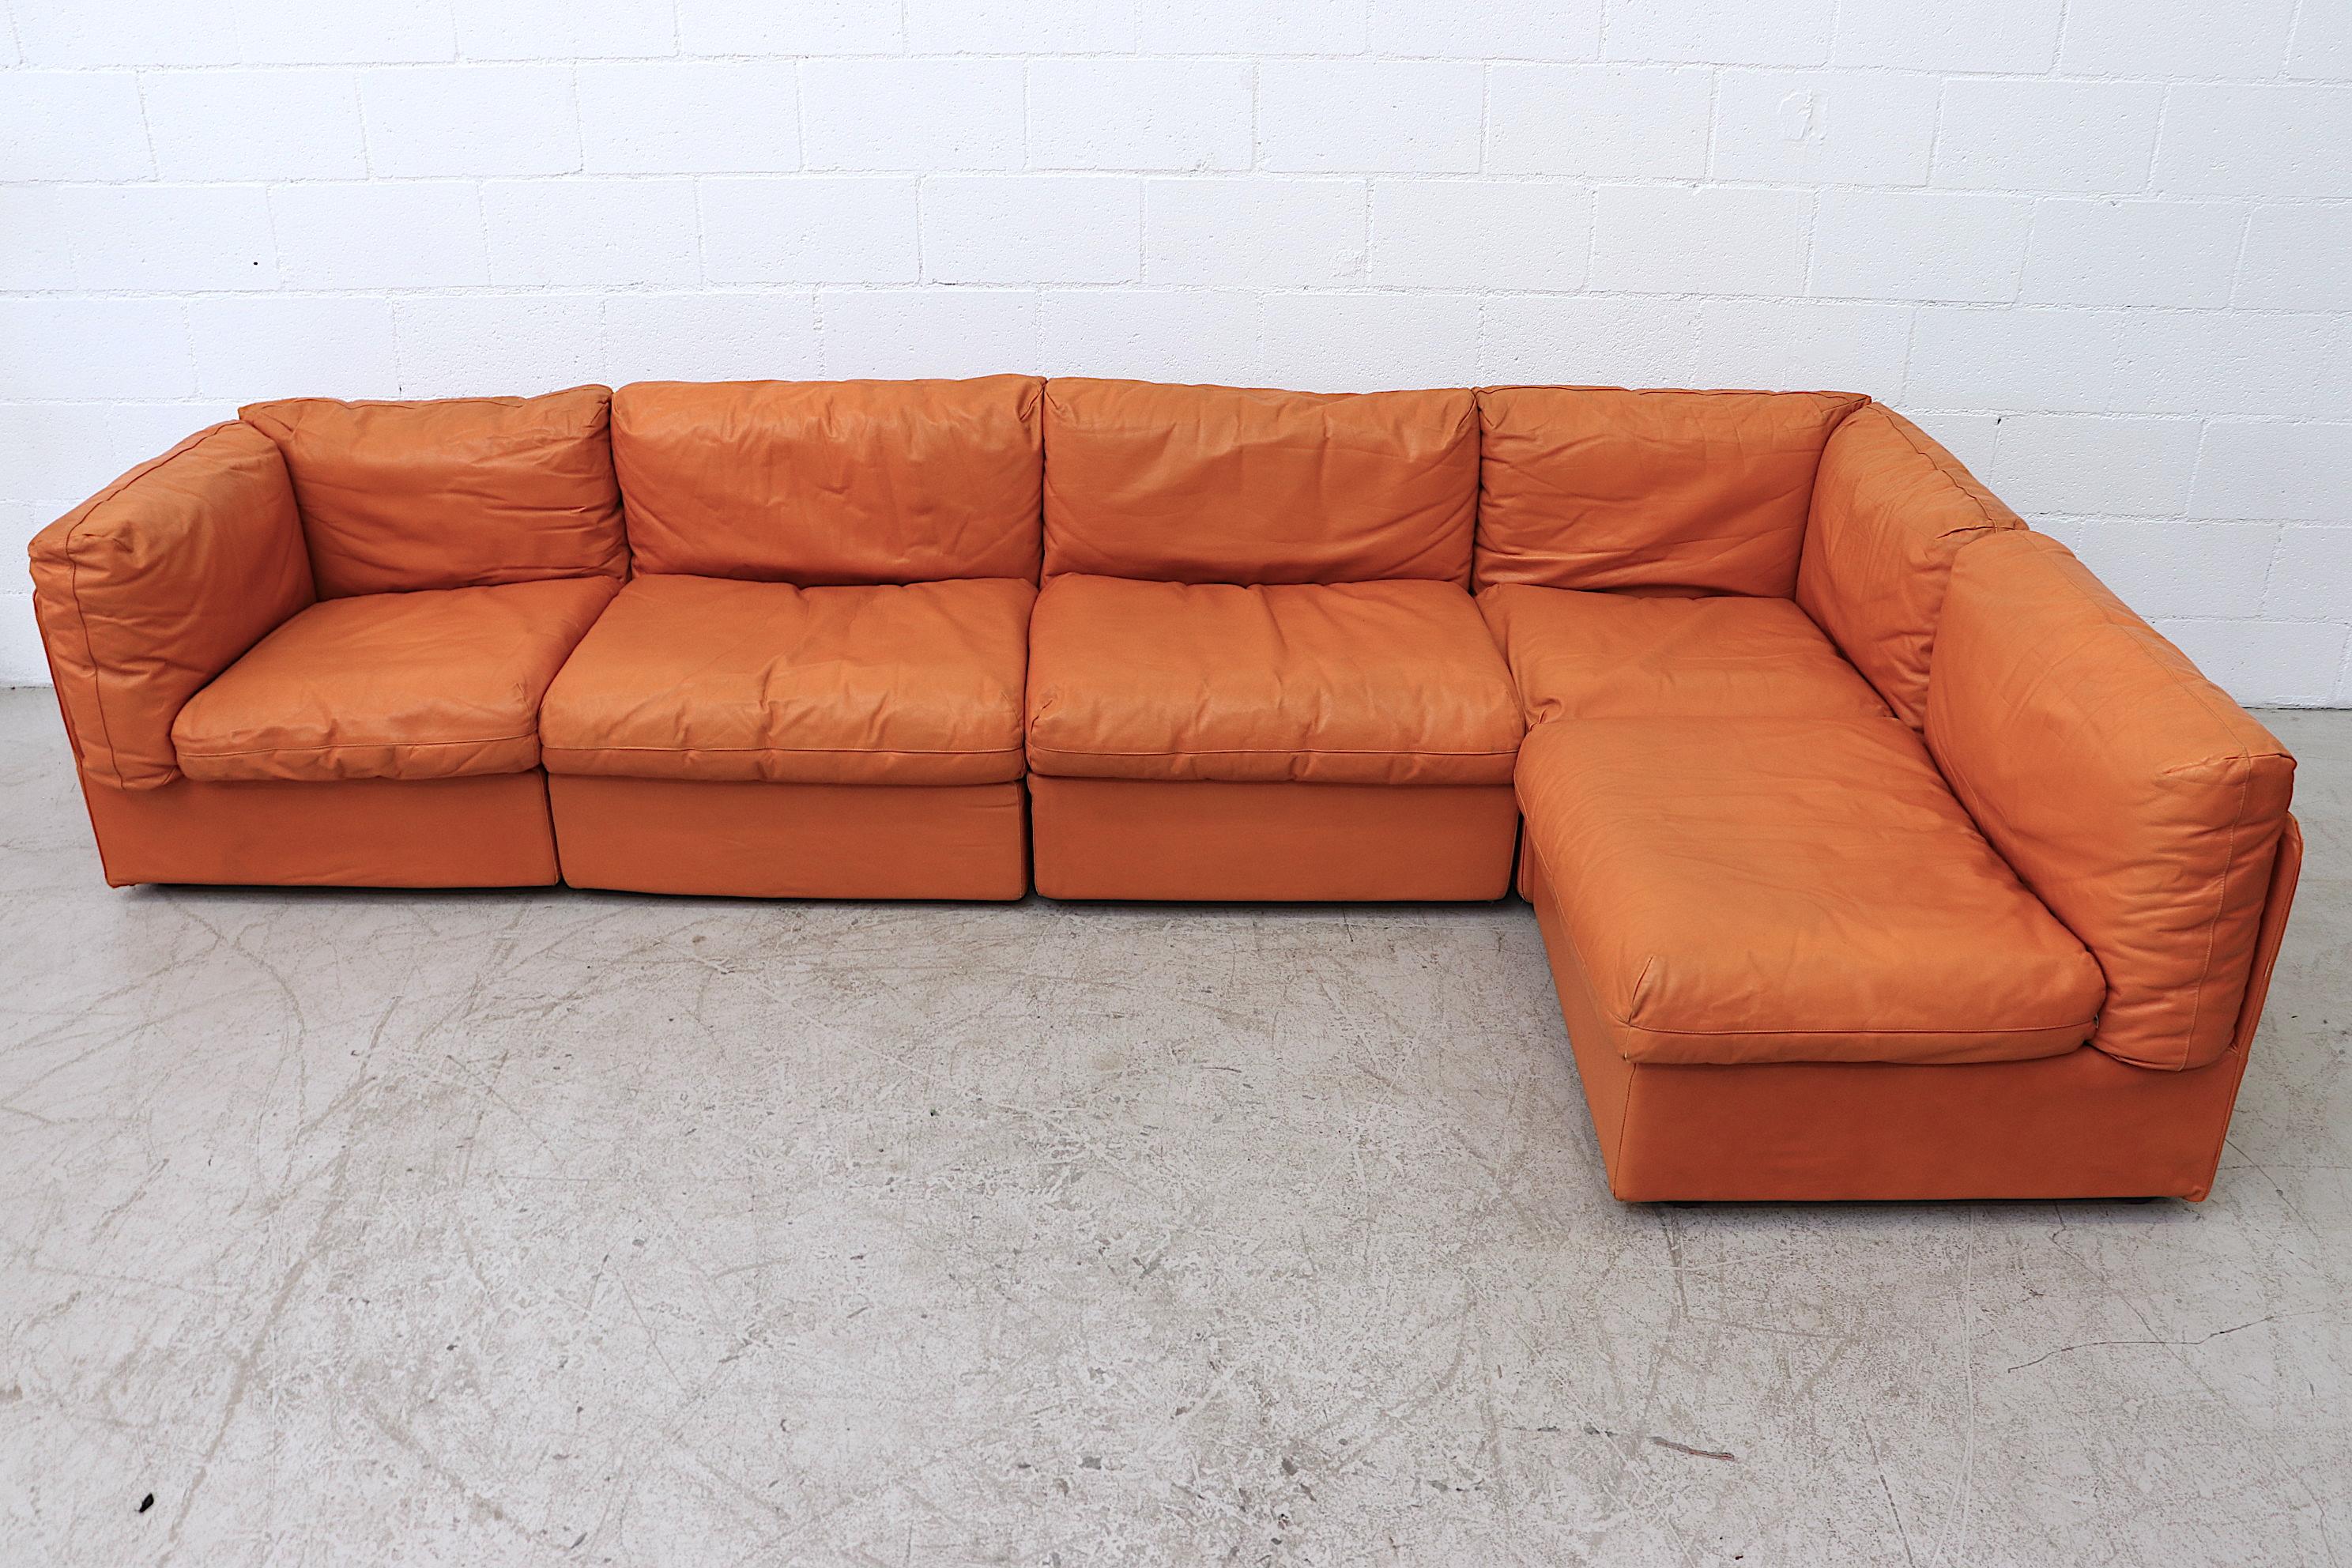 Gorgeous midcentury orange leather sectional. Produced in the 1980s by Italian Production House Bonacina, this sectional has 5 individual sections (30